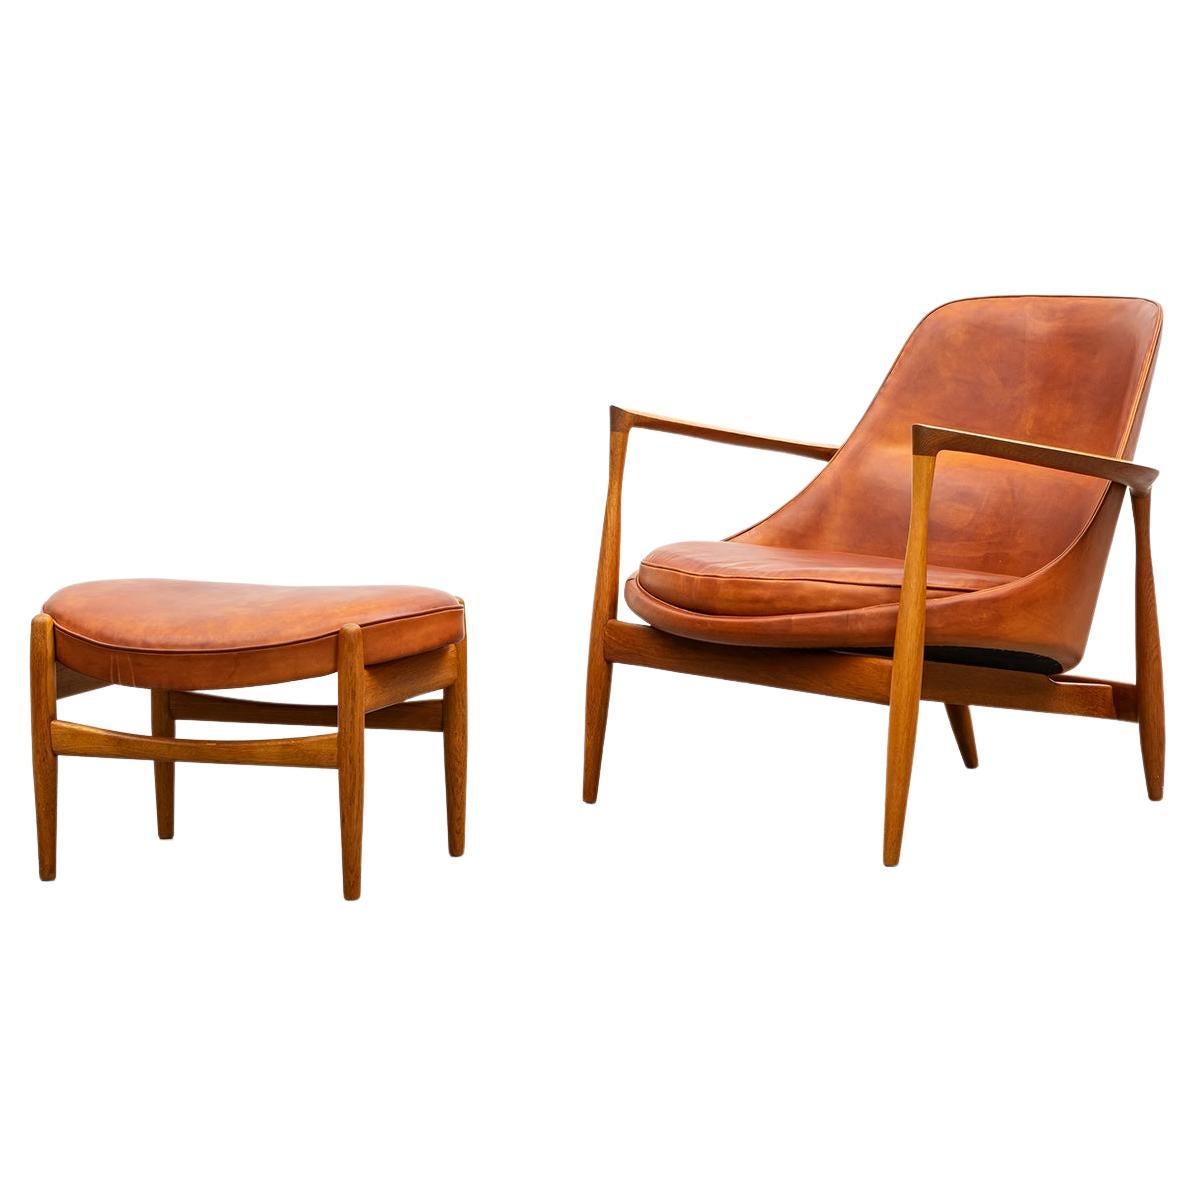 1950's Brown Wooden and Leather Lounge Chairs with Ottoman by Ib Kofod-Larsen For Sale